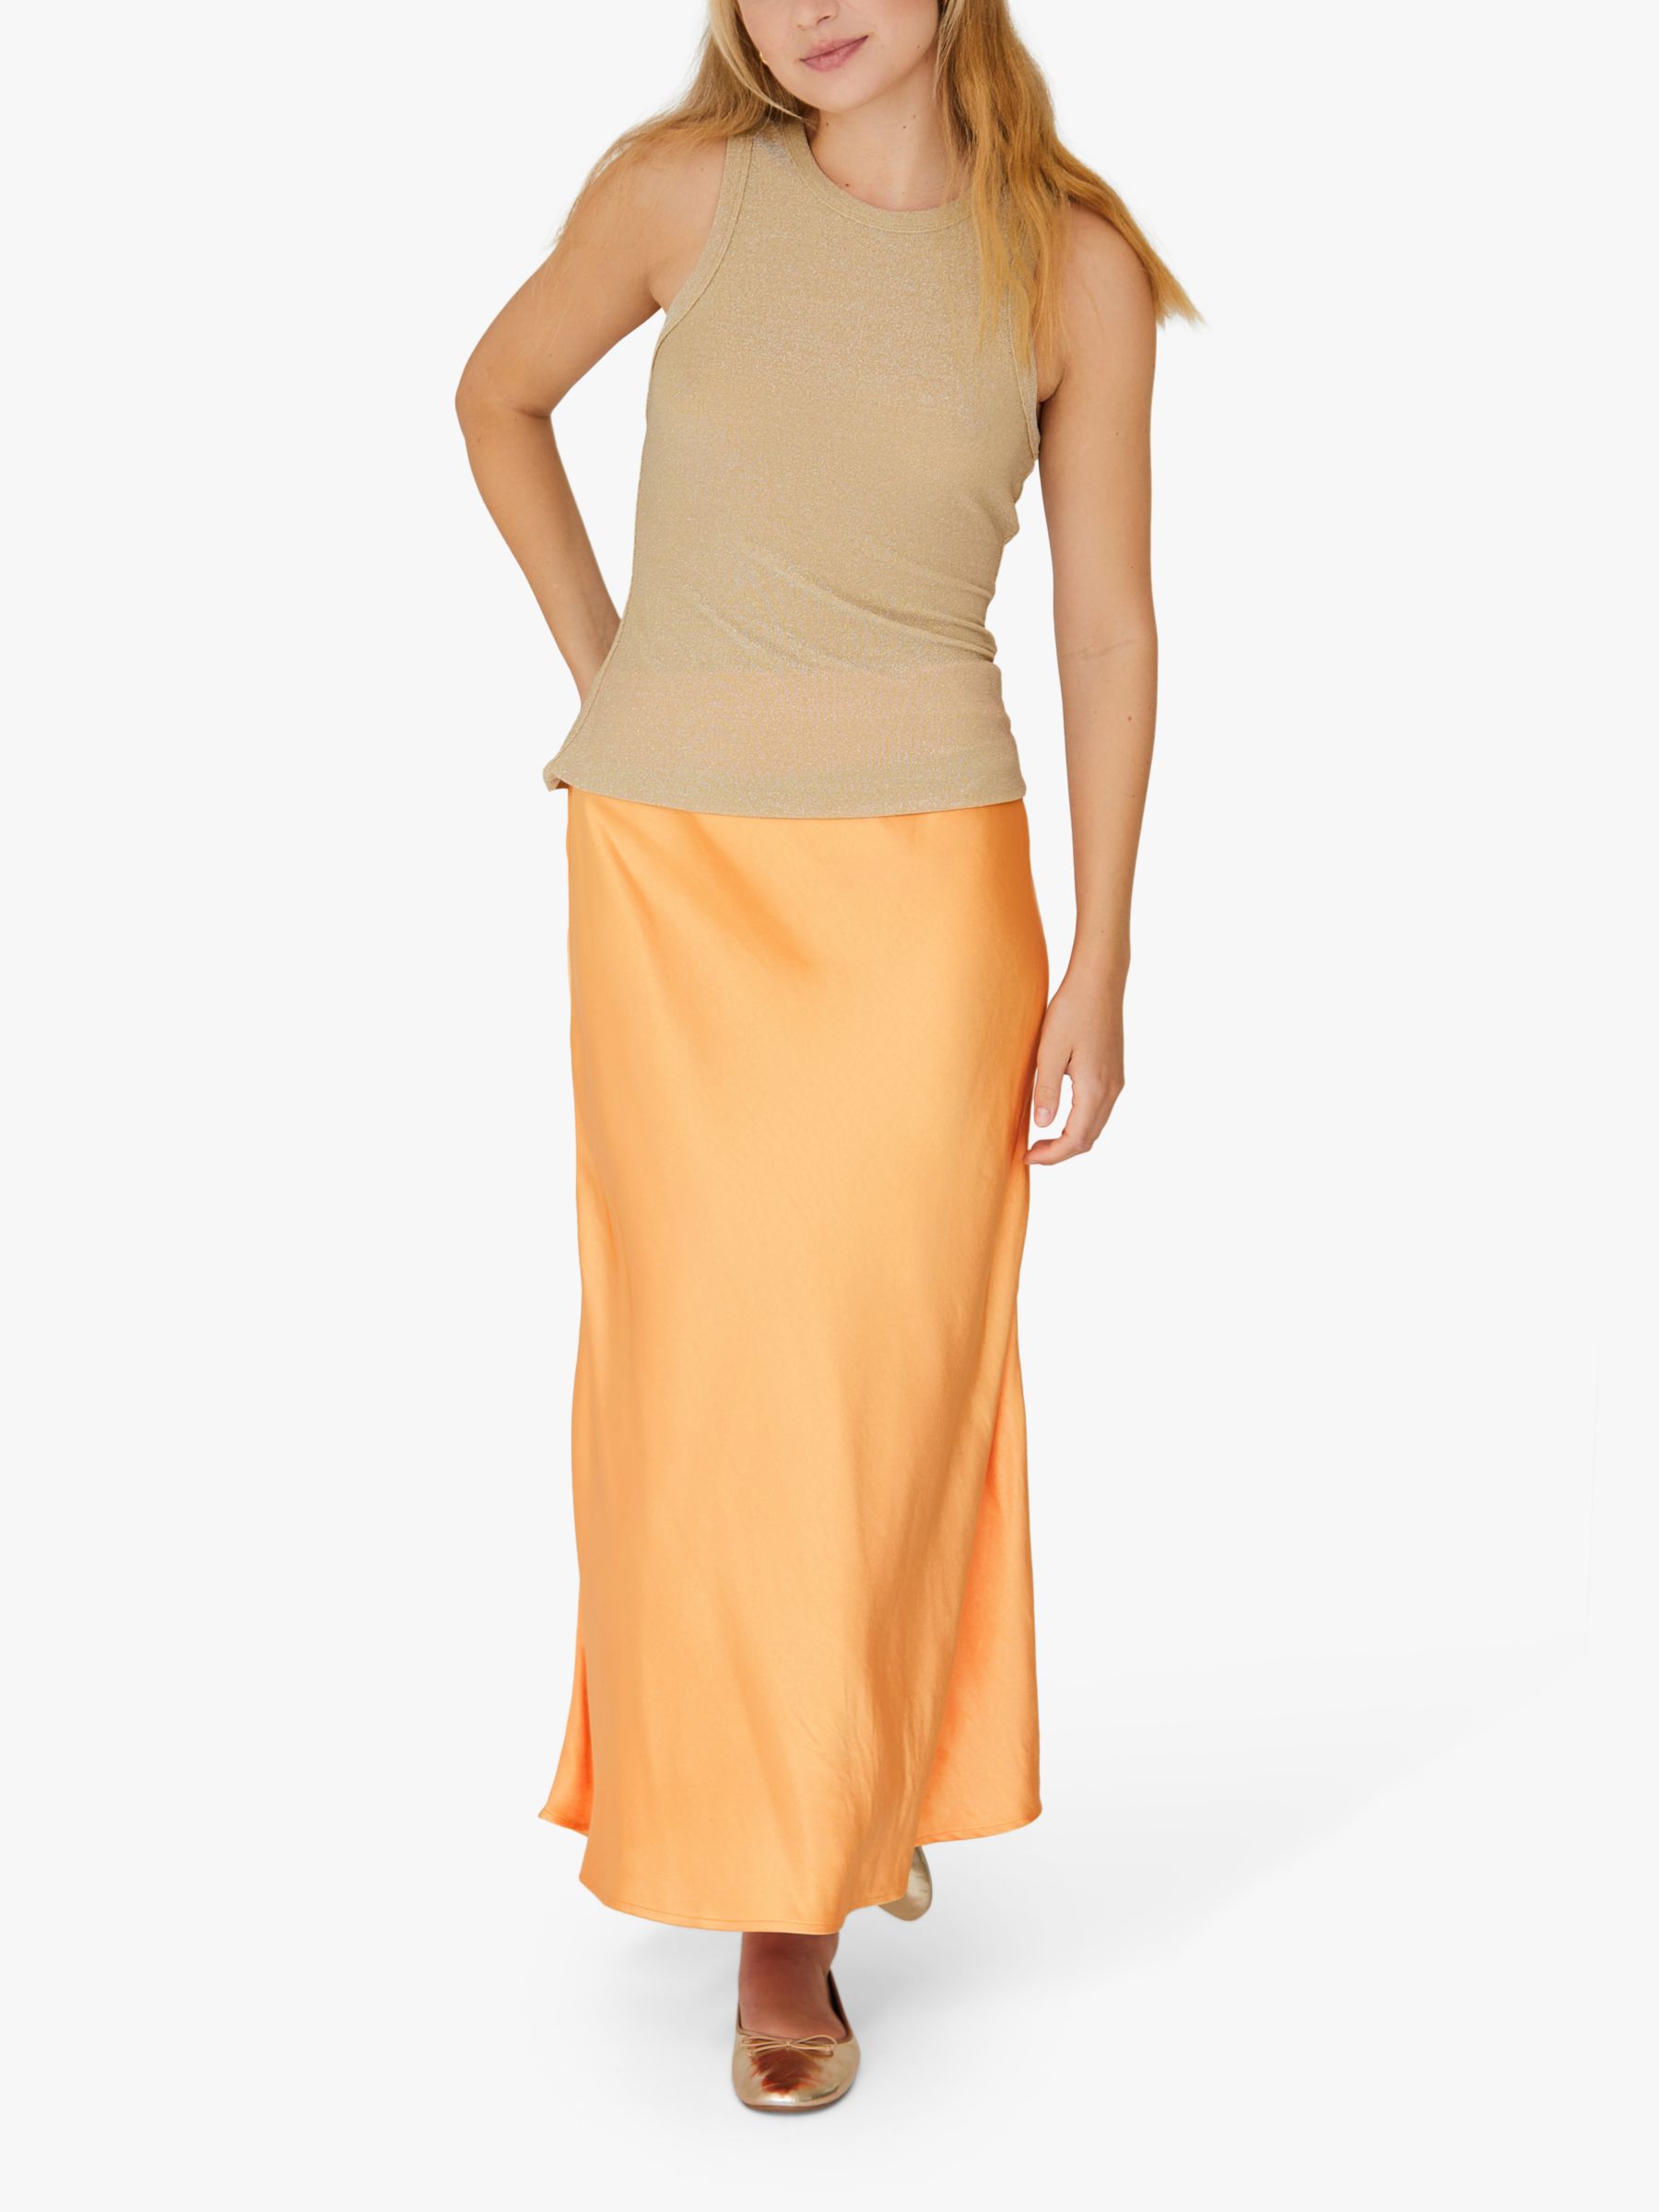 Buy A-VIEW Carry Sateen Midi Skirt Online at johnlewis.com